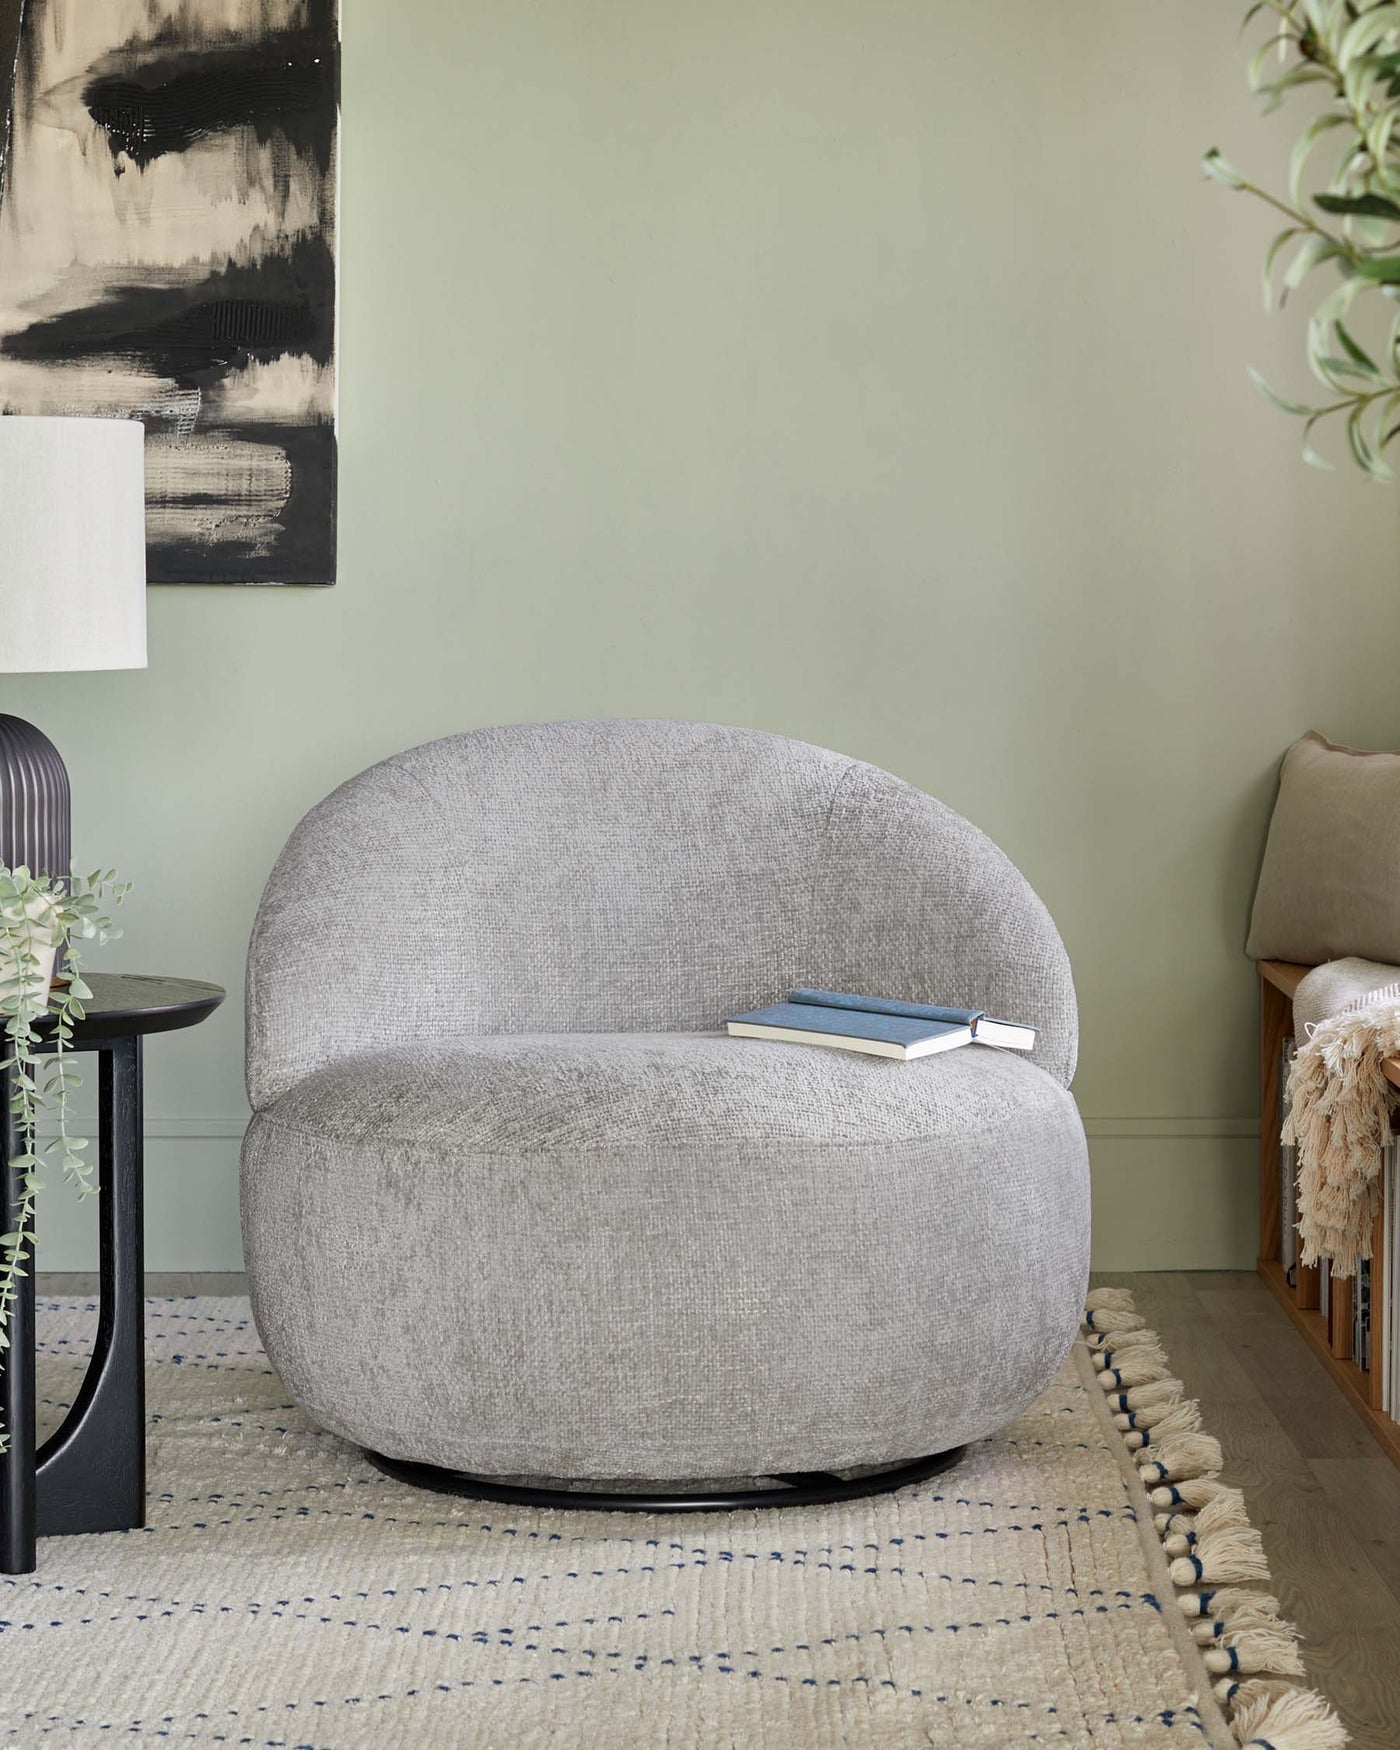 Contemporary grey fabric upholstered curved armchair with a plush seat and backrest, set on a textured off-white area rug with blue stripes and tassel edges, accompanied by a minimalist black round side table with a book on top. The setting includes a neutral beige throw on a wooden bench in the background, a modern abstract wall painting, a white floor lamp, and green houseplants, creating a stylish and cosy ambiance.